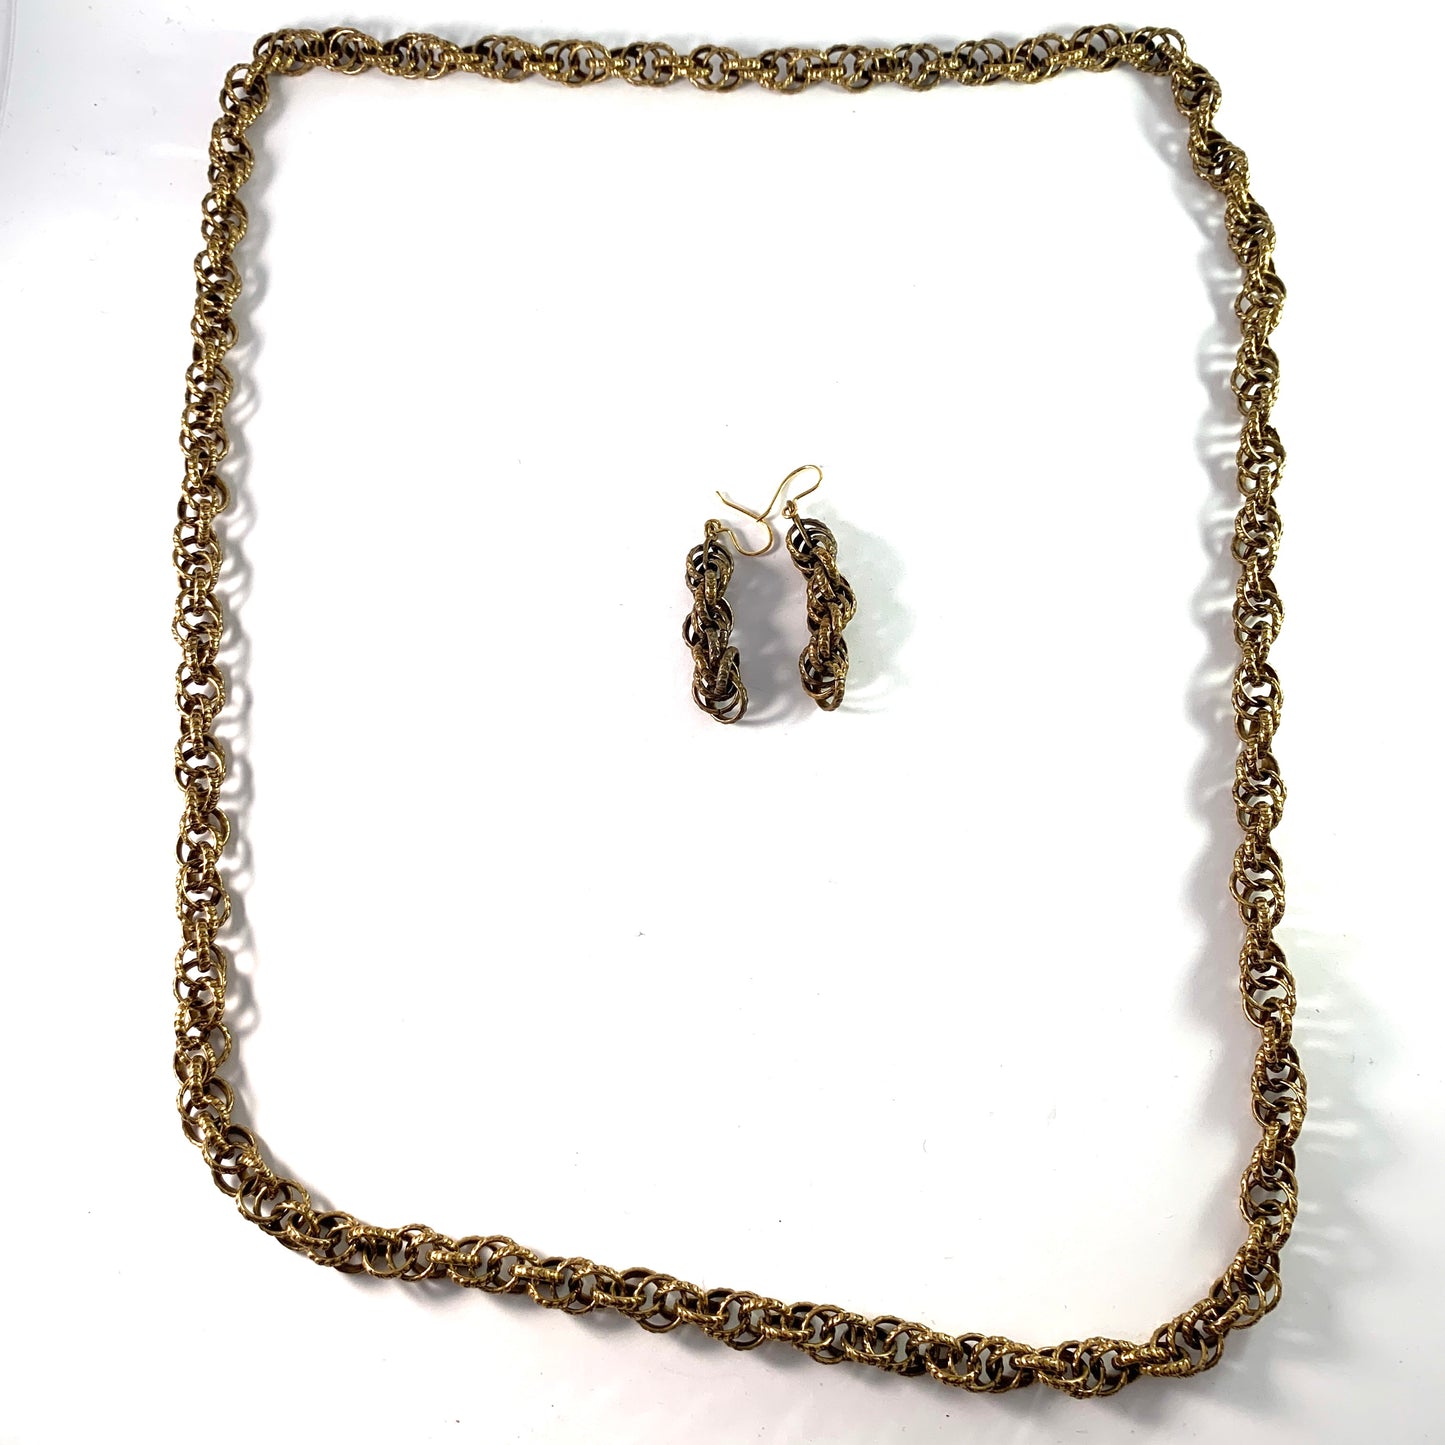 Kalevala Koru, Finland 1970s. Long Necklace and Earrings. Bronze. Boxed.